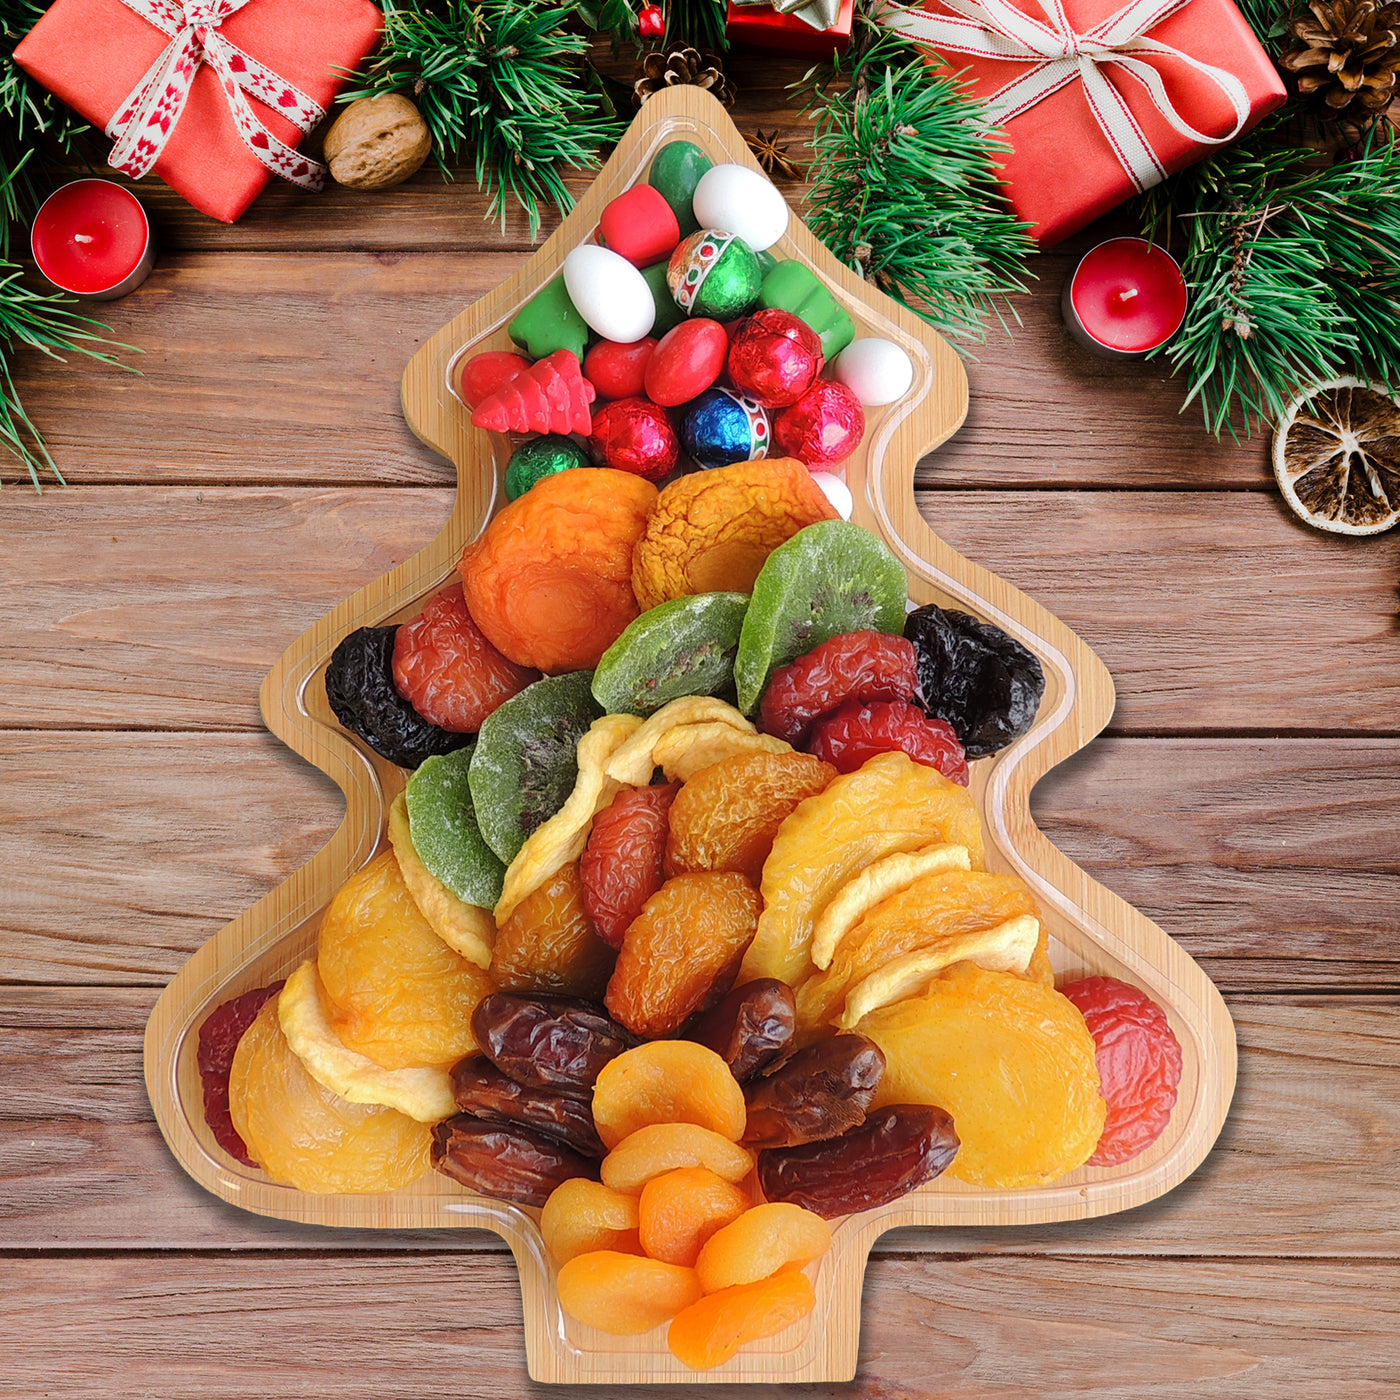 Dried Fruit & Confections Snowman Cutting Board 21 oz